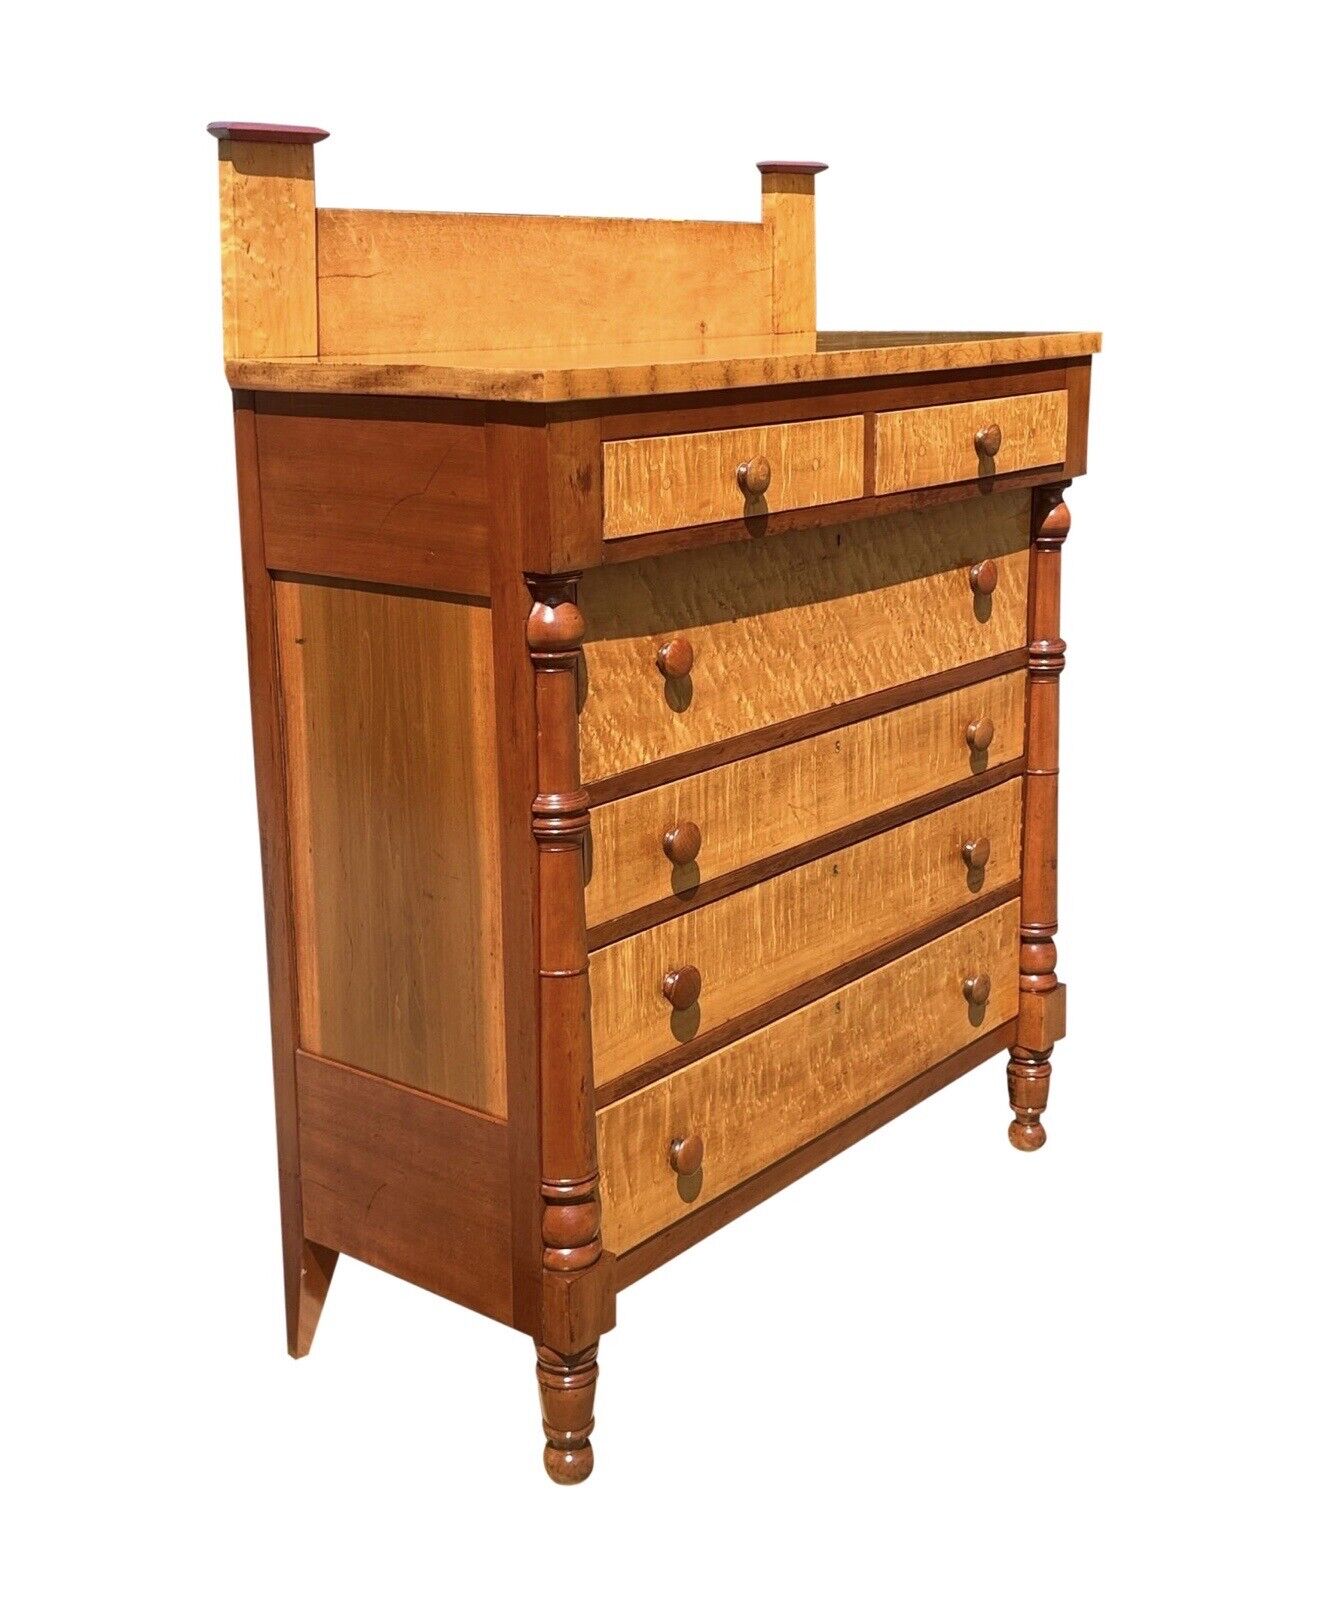 Early 19th Century Federal Birds Eye Maple Chest of Drawers With Cherry & Poplar